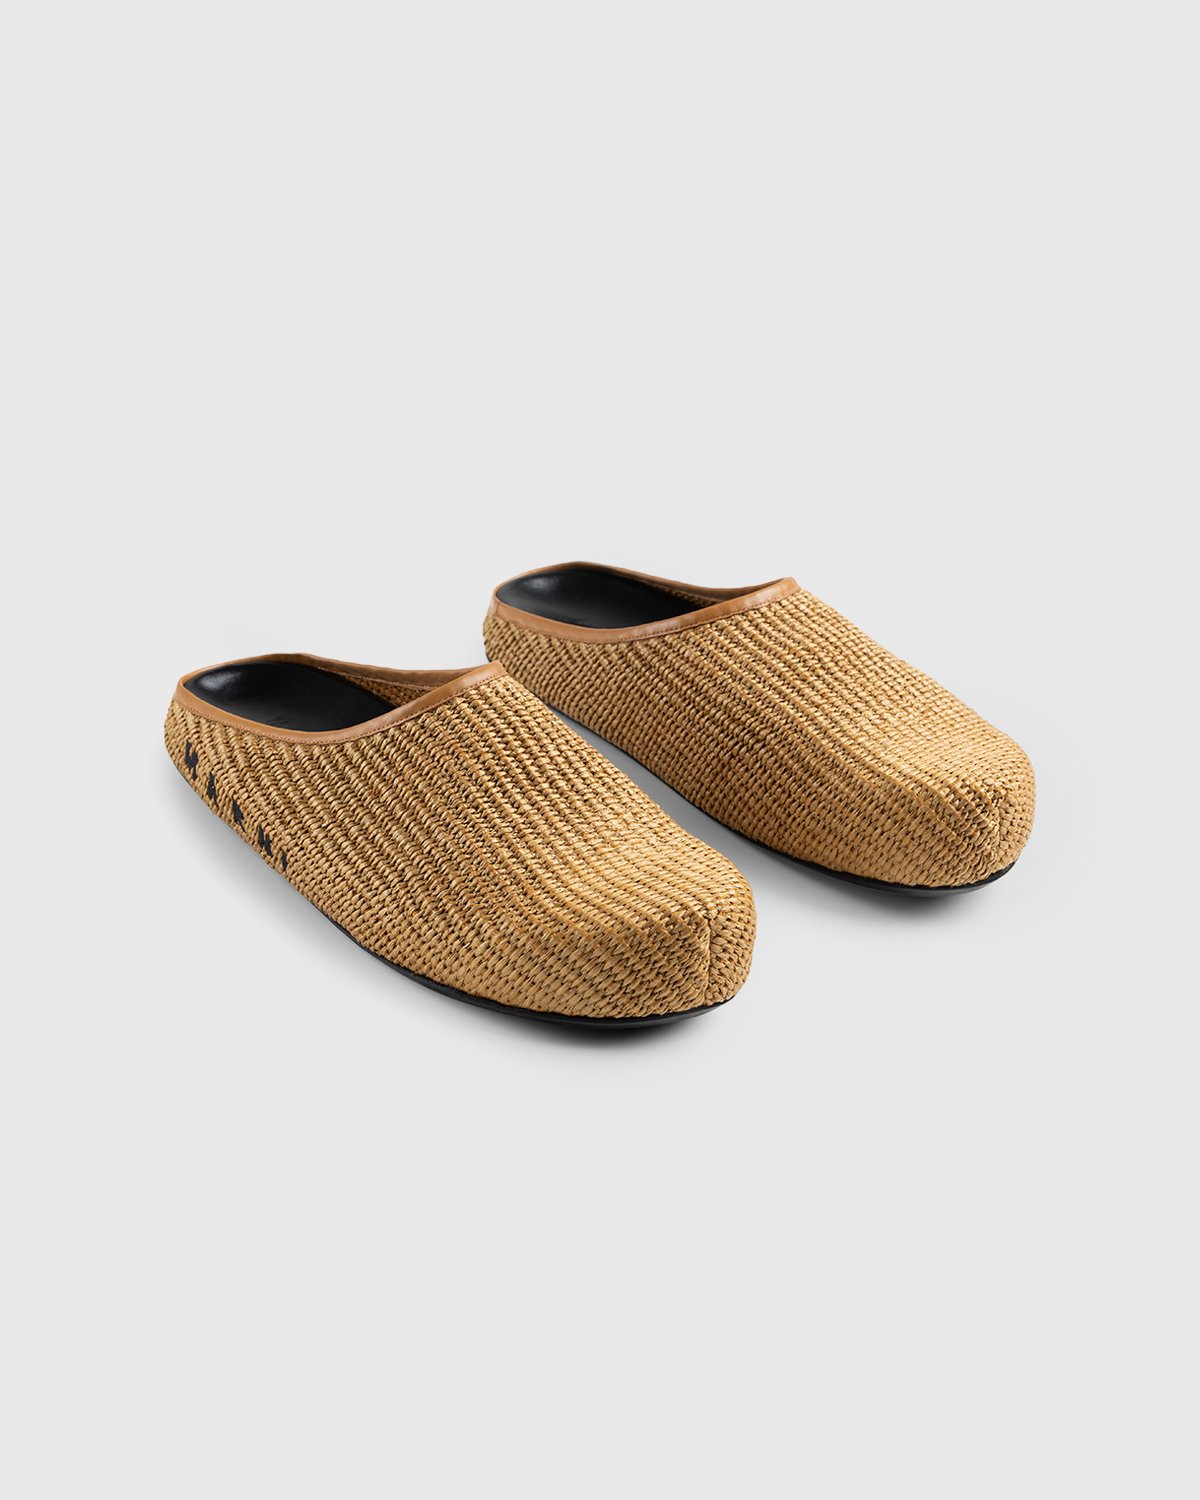 Marni - Woven Raffia and Leather Mules Brown/Black - Footwear - Brown - Image 3